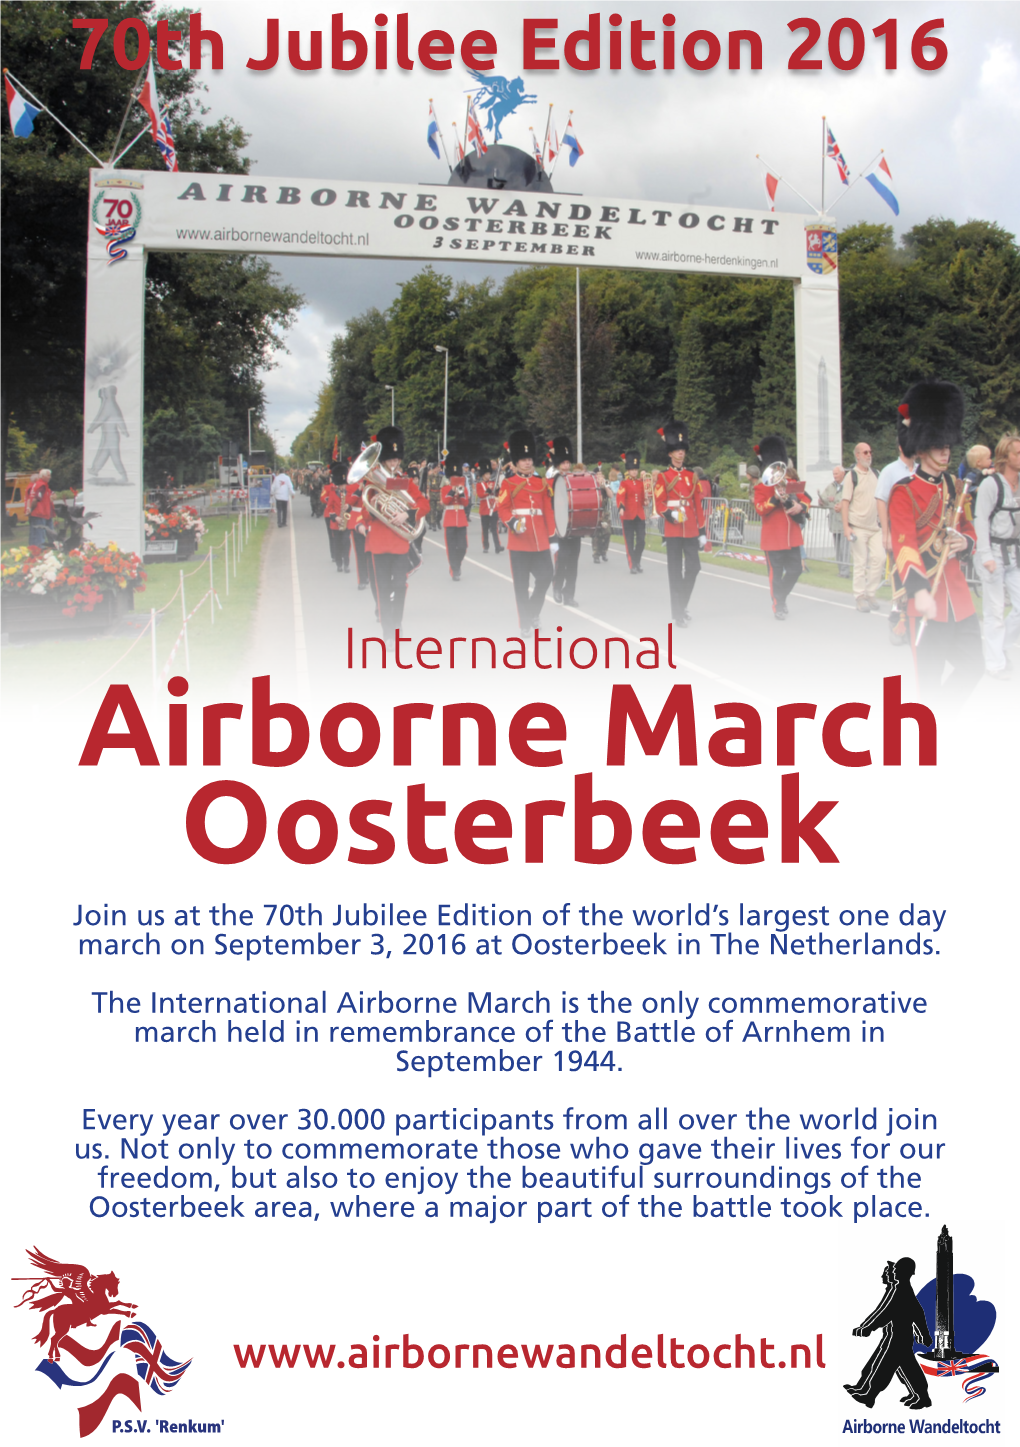 Airborne March Oosterbeek Join Us at the 70Th Jubilee Edition of the World’S Largest One Day March on September 3, 2016 at Oosterbeek in the Netherlands